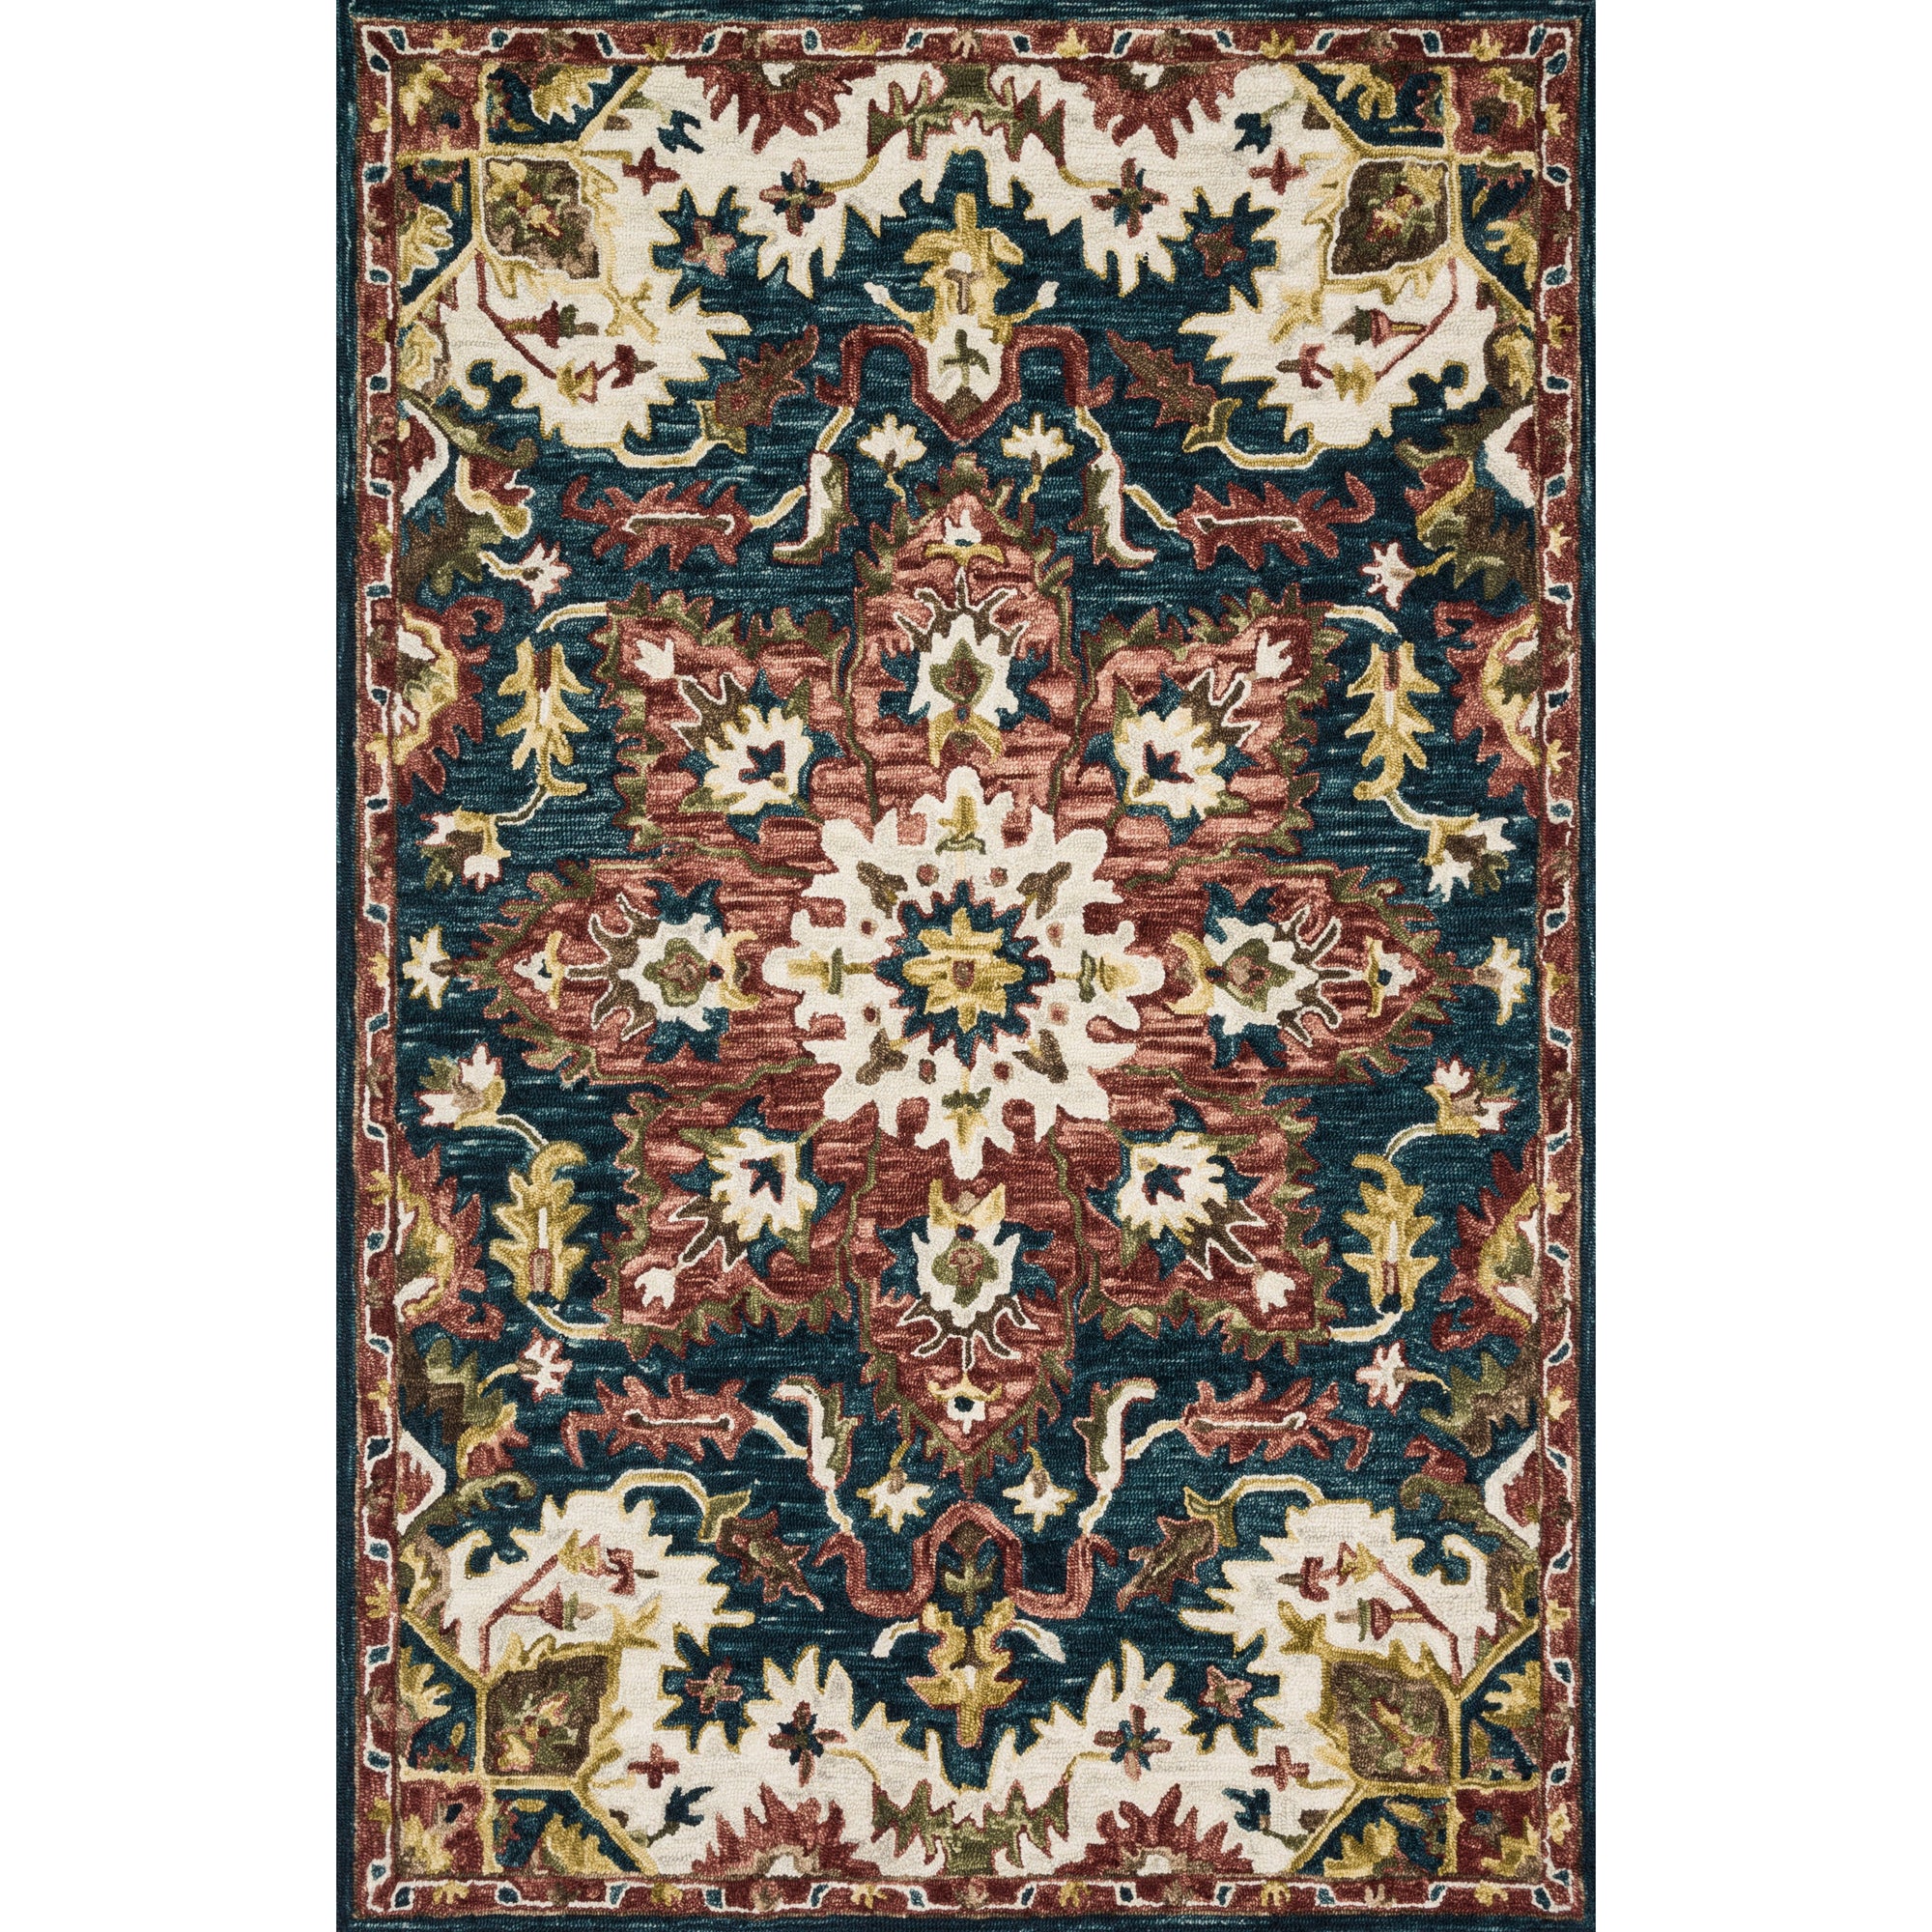 Rugs by Roo Loloi Victoria Teal Raspberry Area Rug in size 18" x 18" Sample